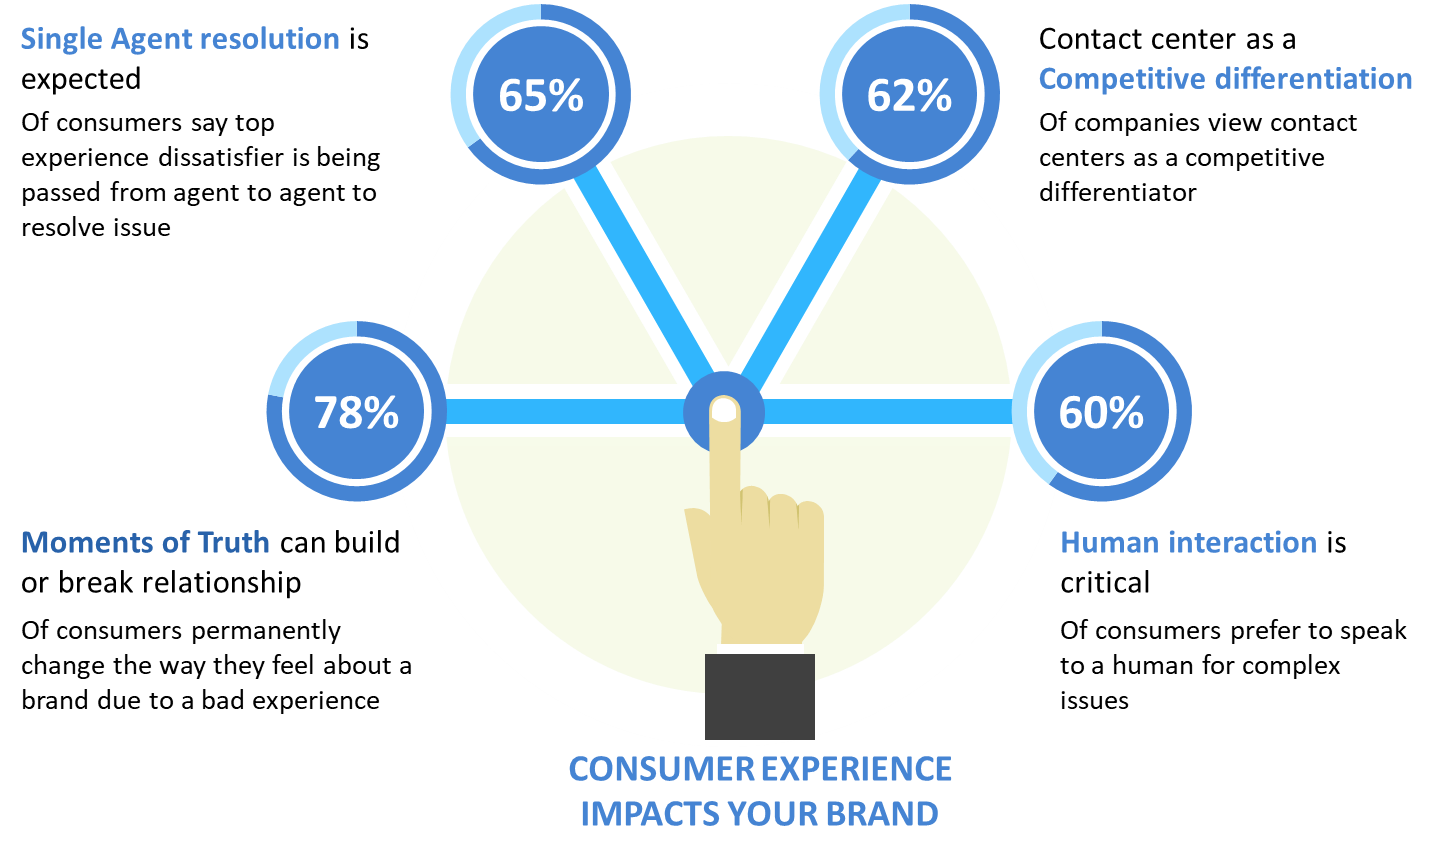 Customer experience impacts your brand